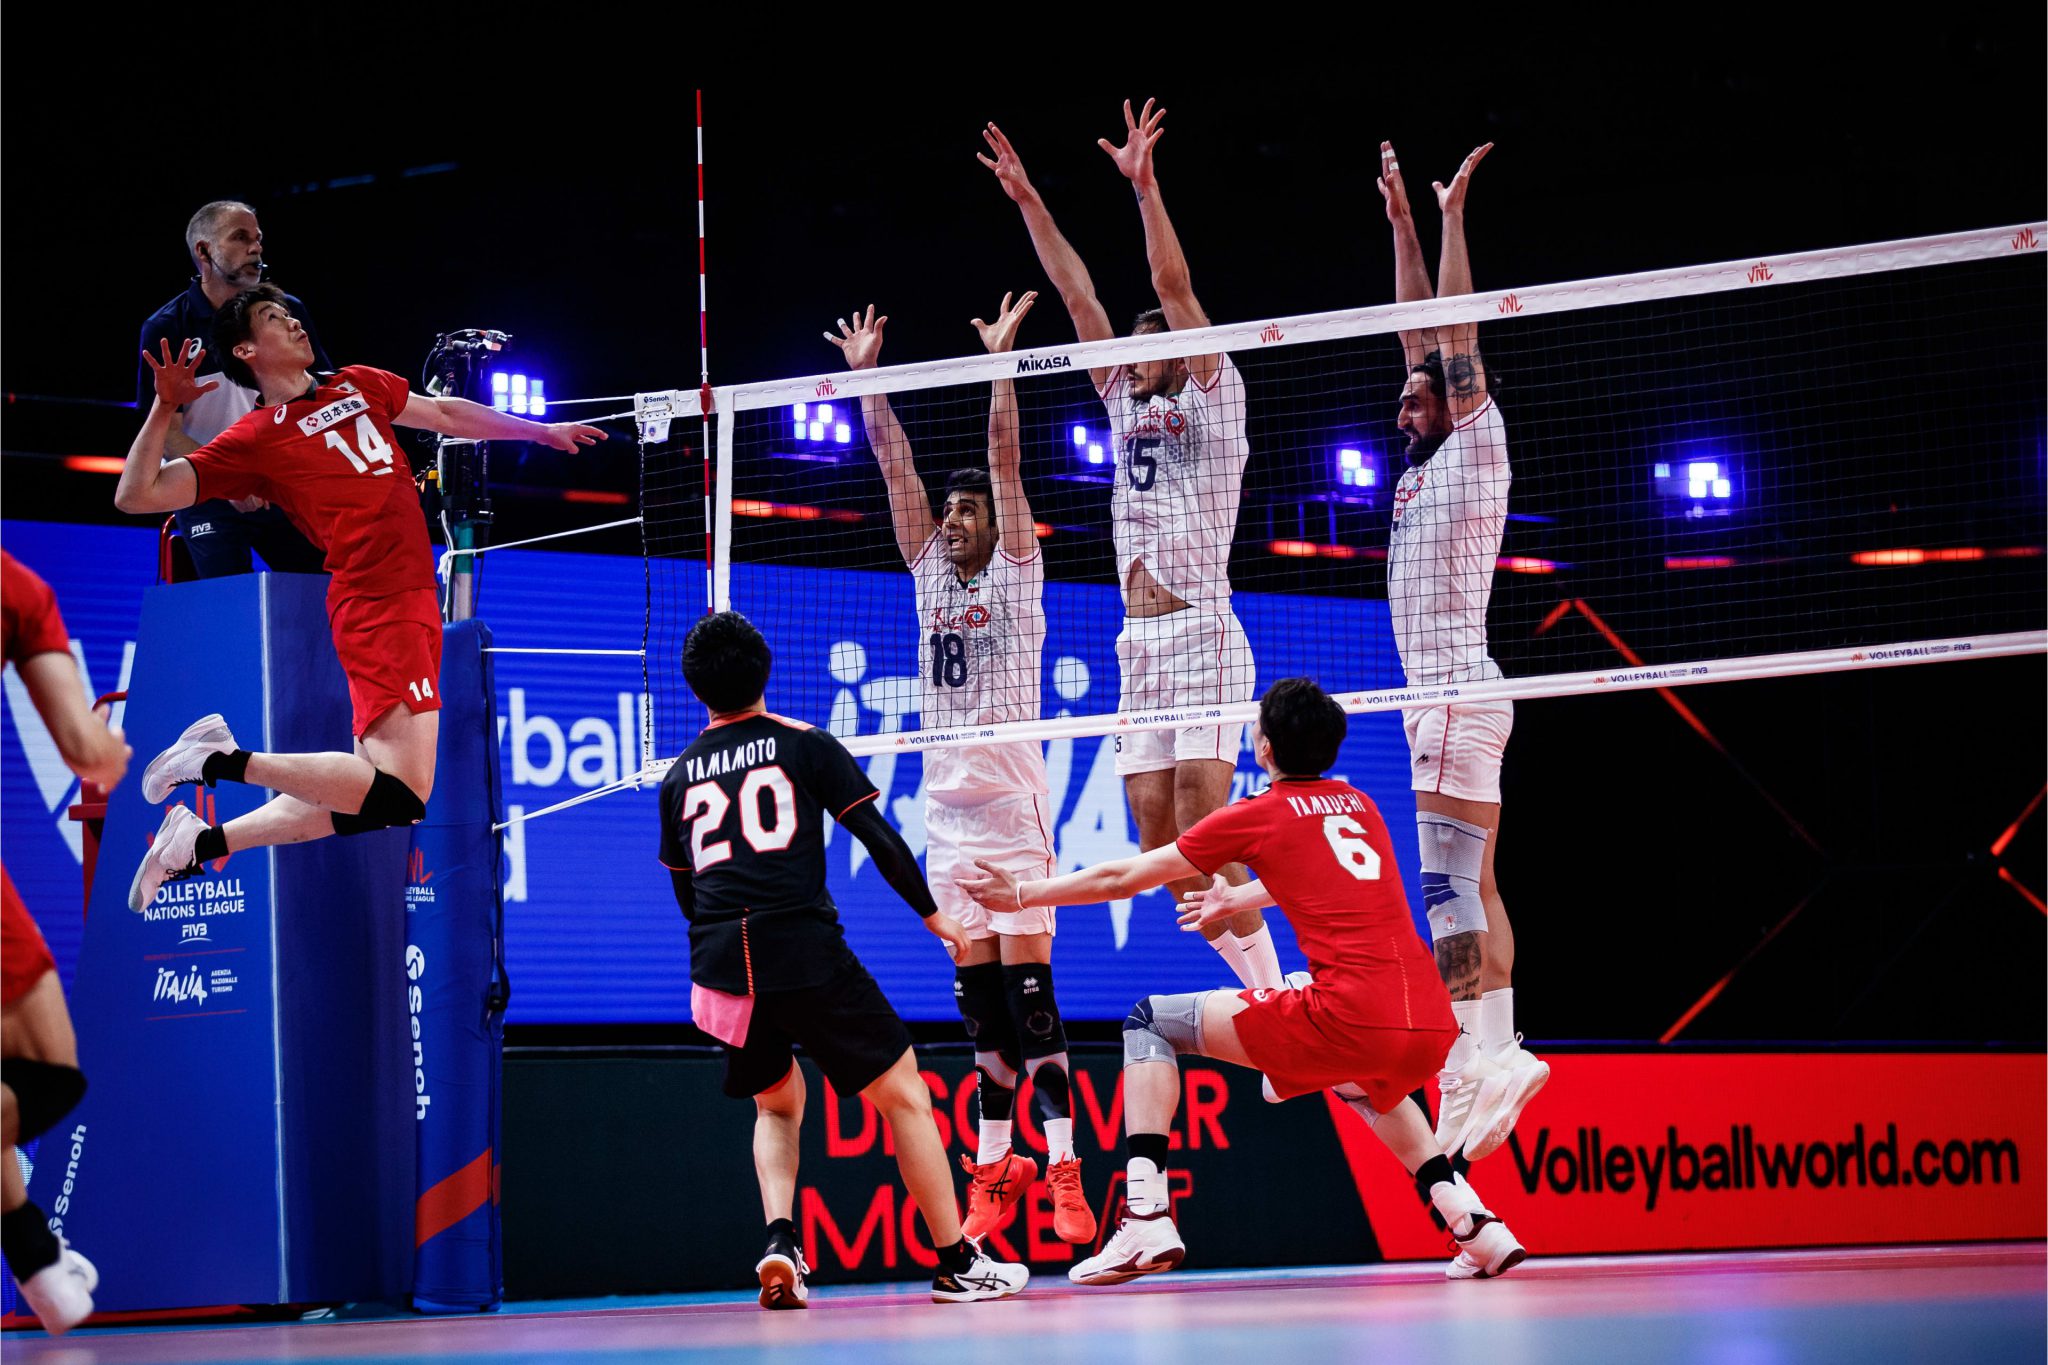 JAPAN OUTPLAY ASIAN CHAMPS IRAN IN STRAIGHT SETS AT 2021 VNL – Asian